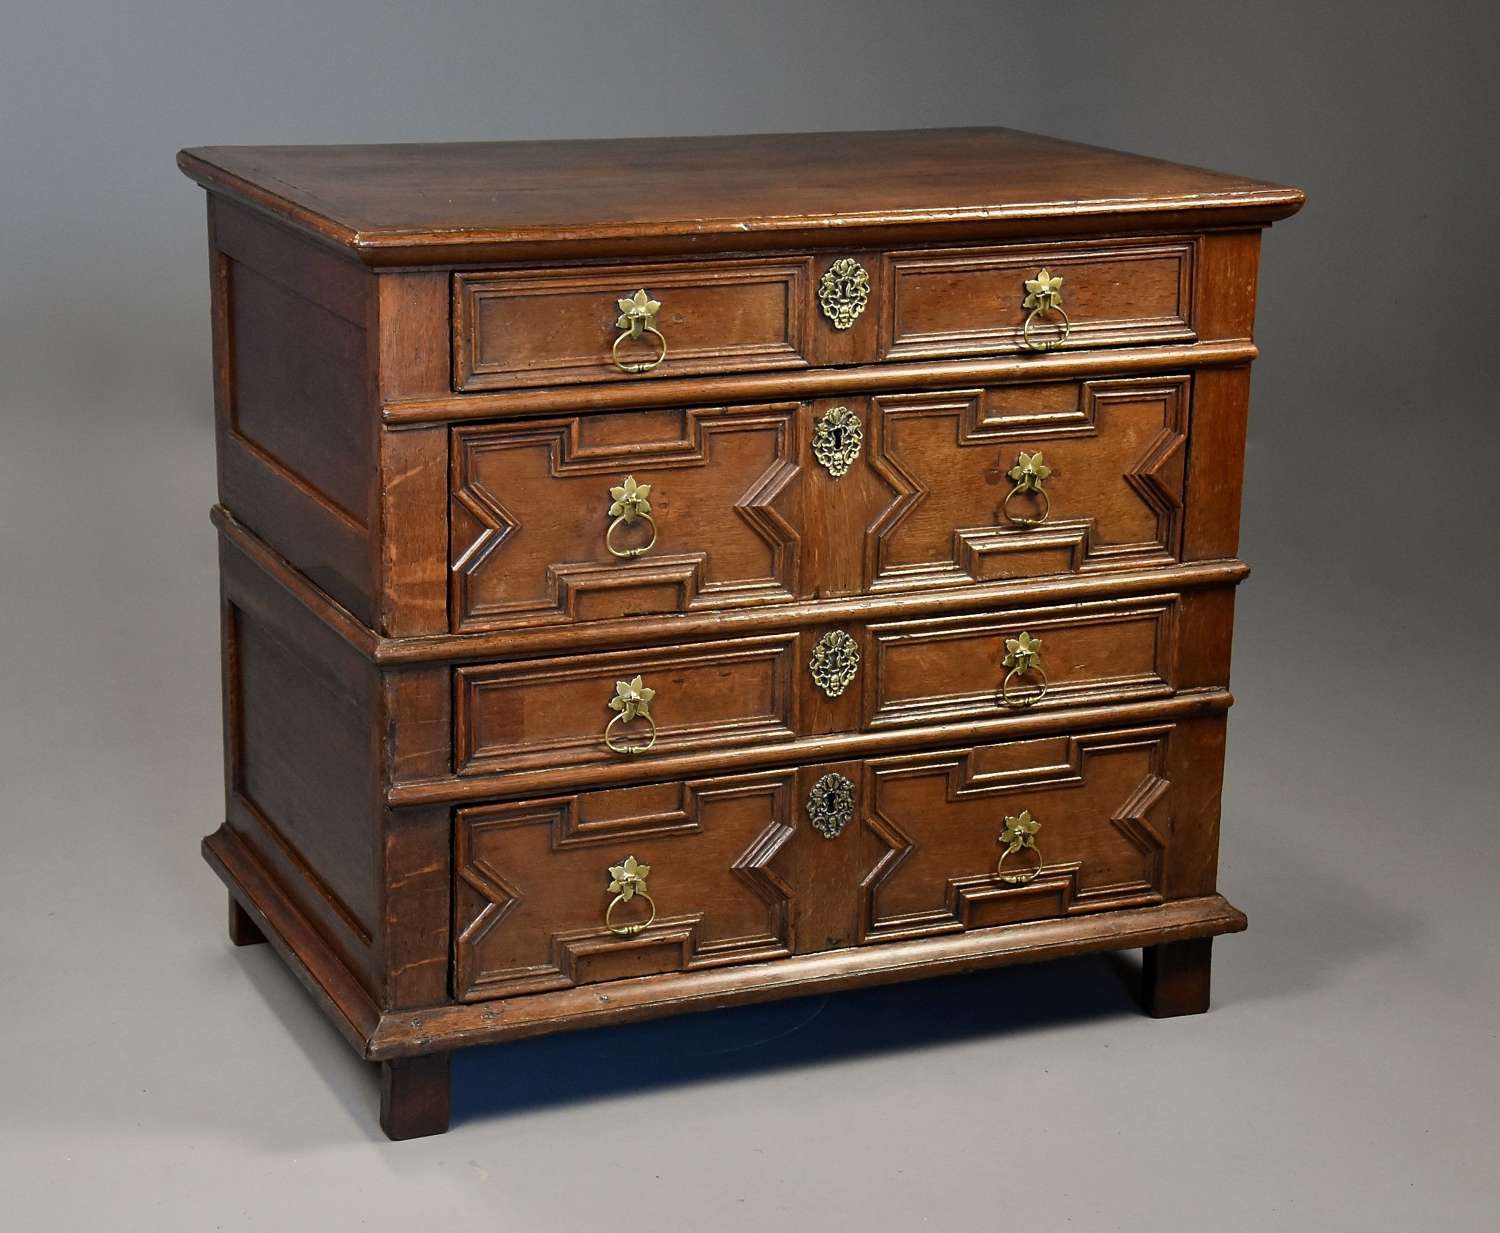 Late 17thc oak moulded front chest of drawers of fine, faded patina